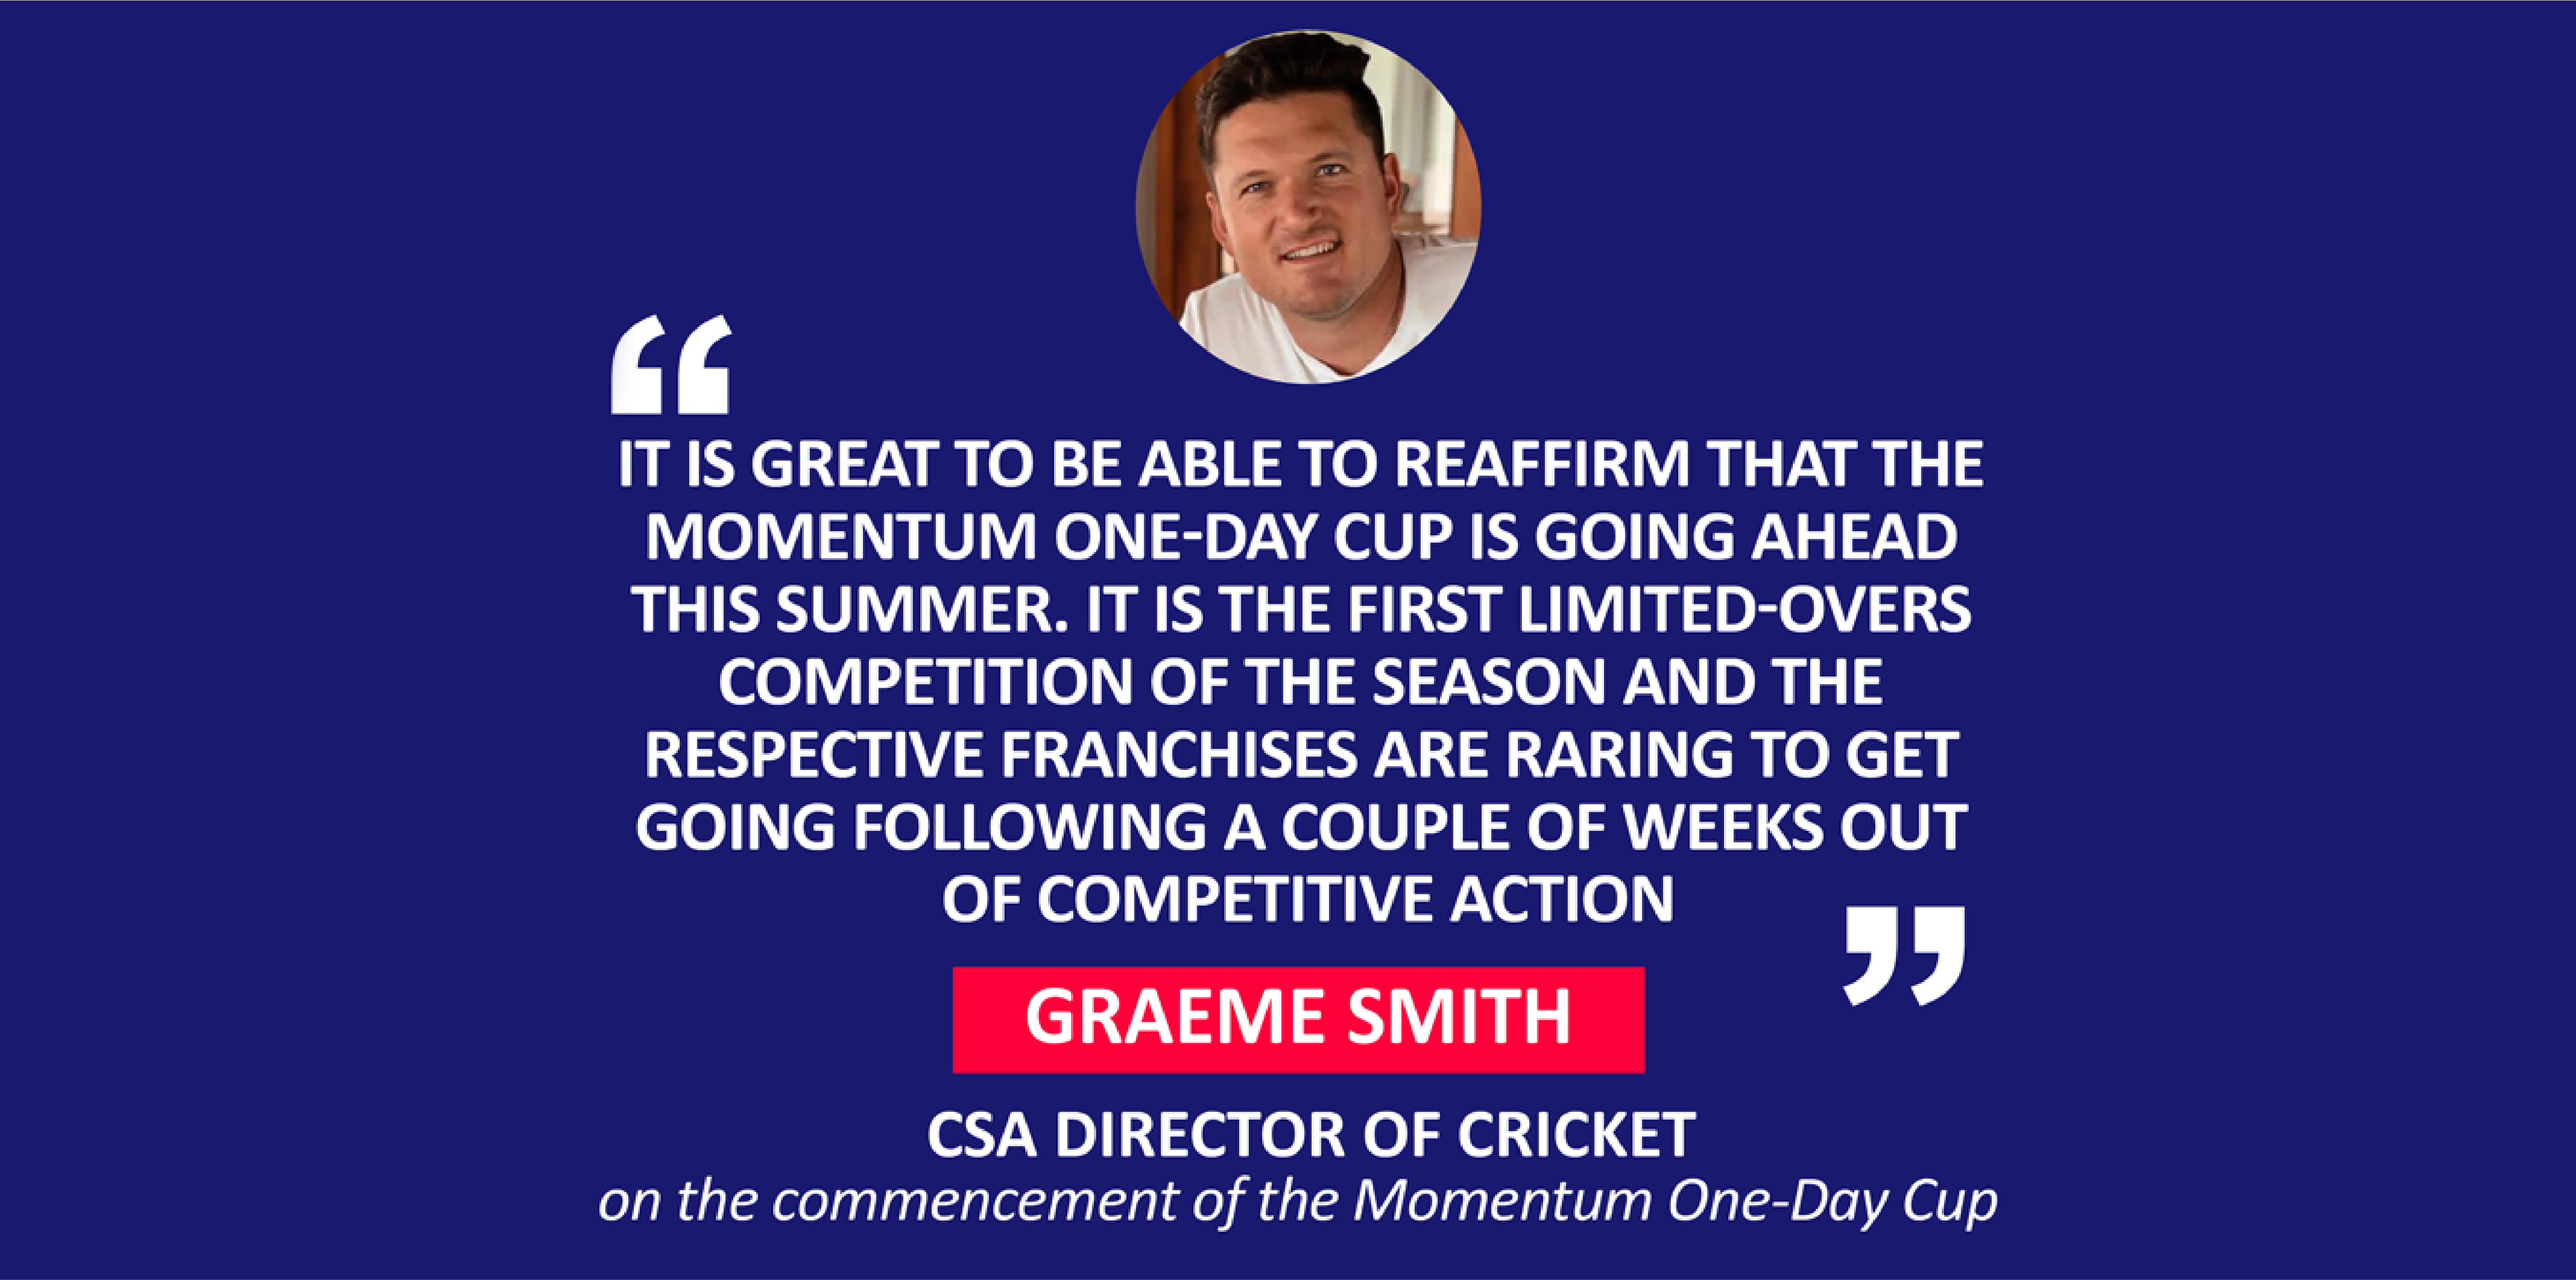 Graeme Smith, CSA Director of Cricket on the commencement of the Momentum One-Day Cup